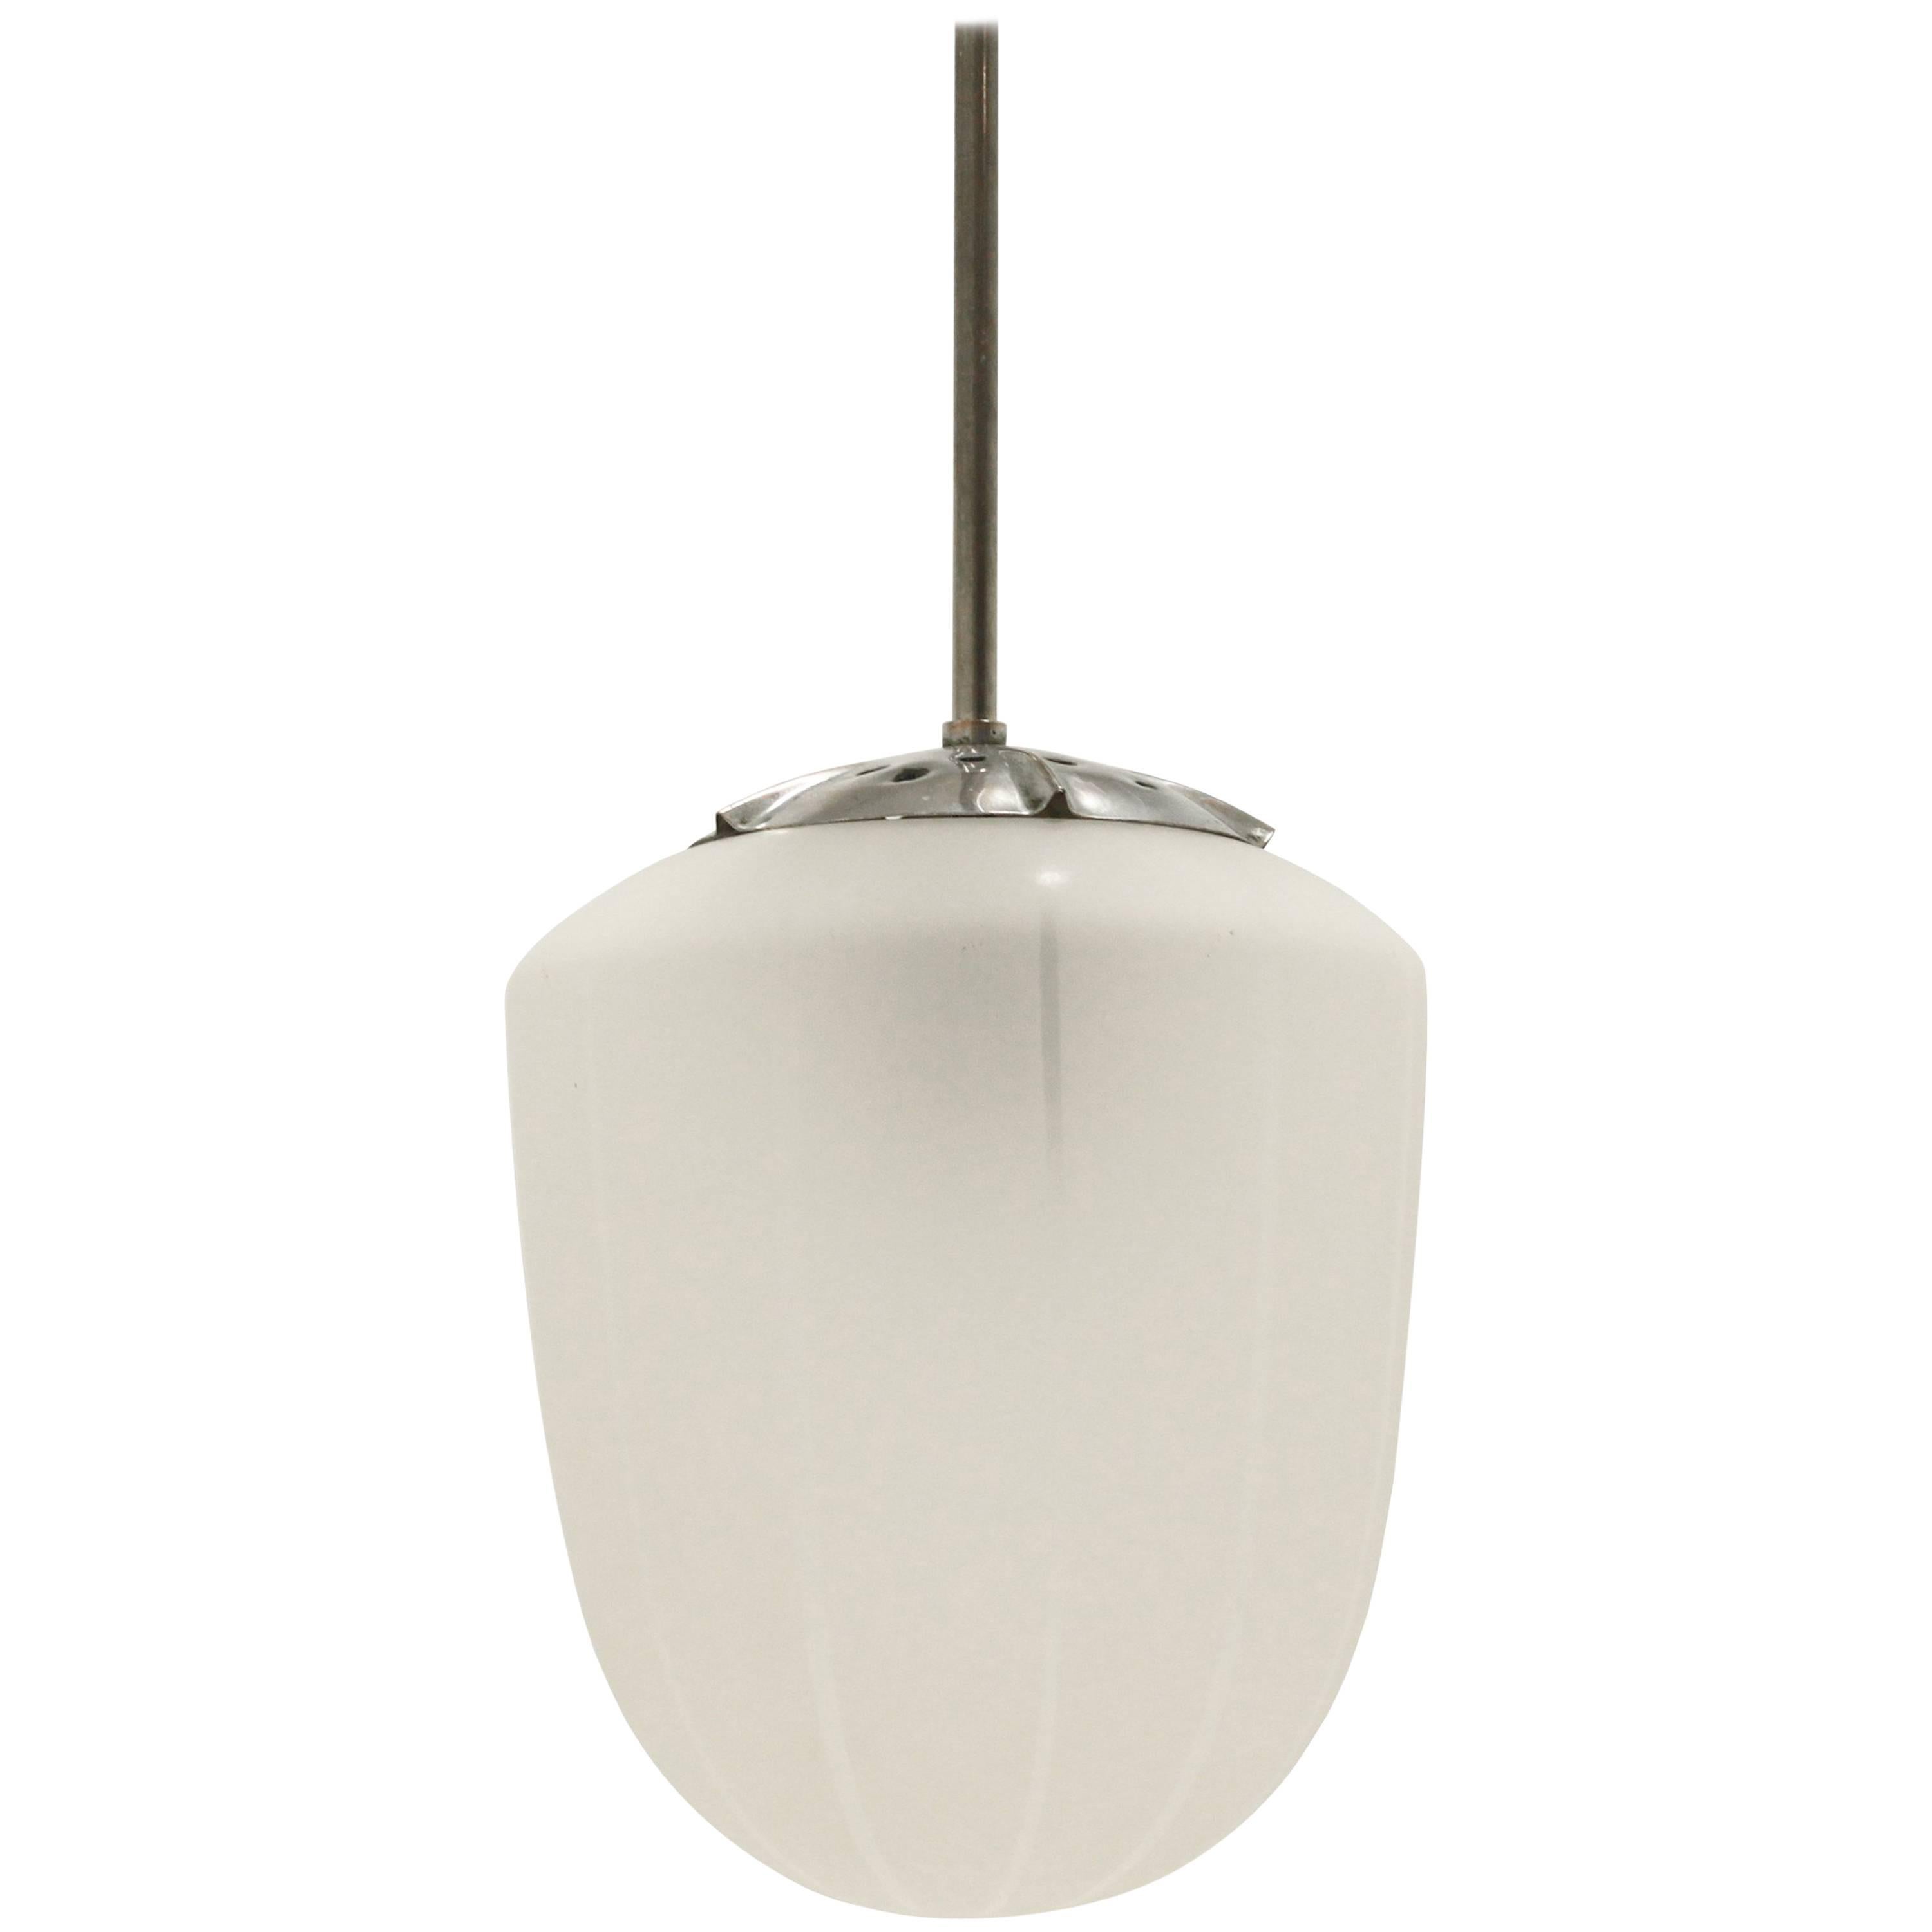 Swedish Functionalist Ceiling Light, 1950s For Sale